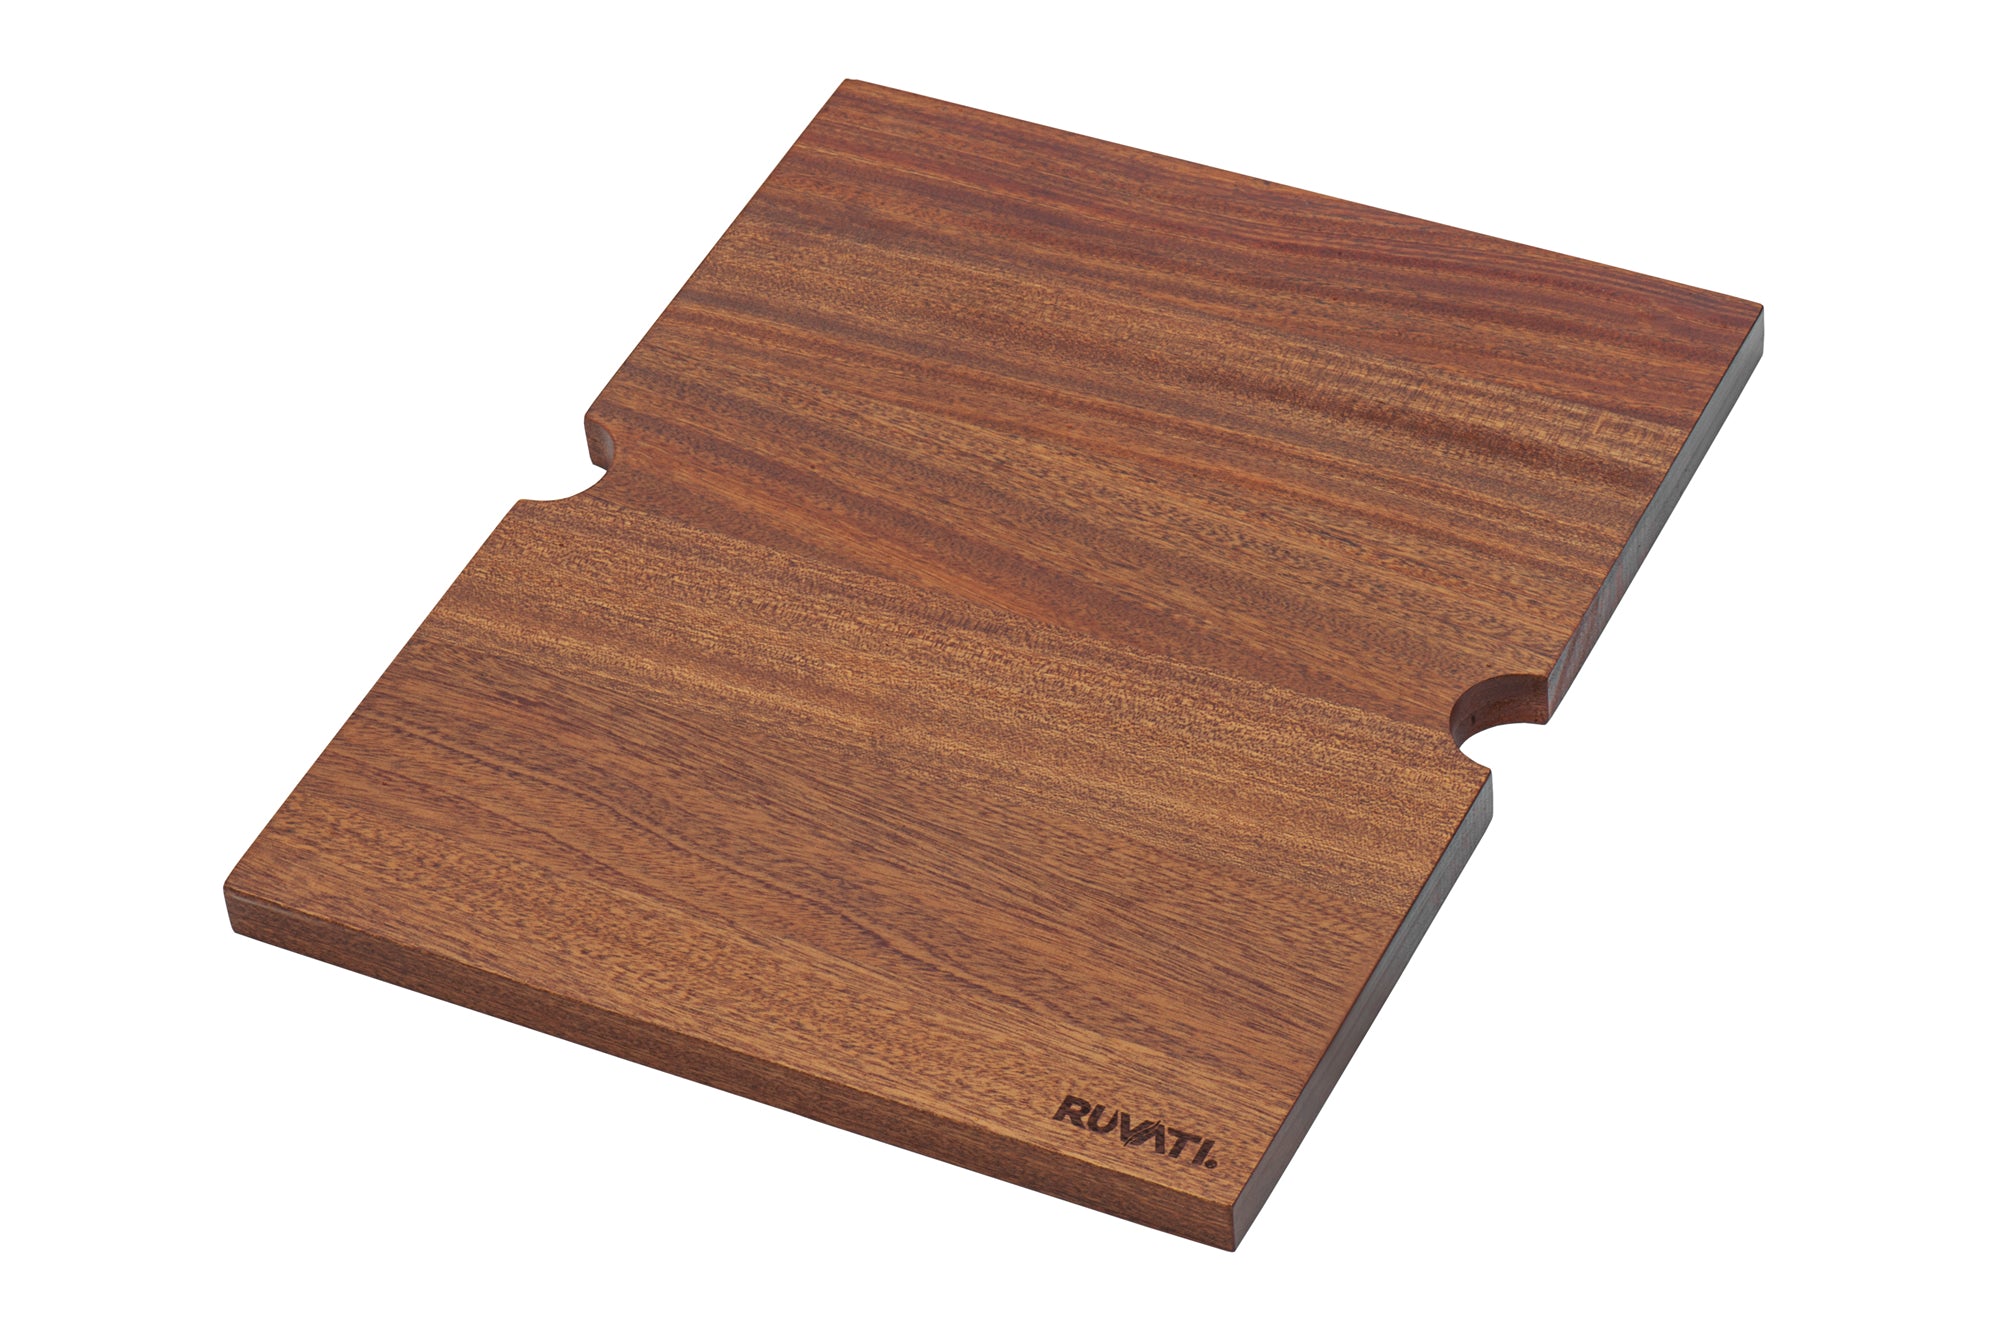 Ruvati 13 x 16 inch Solid Wood Replacement Cutting Board for RVH8210 and RVQ5210 workstation sinks – RVA1210